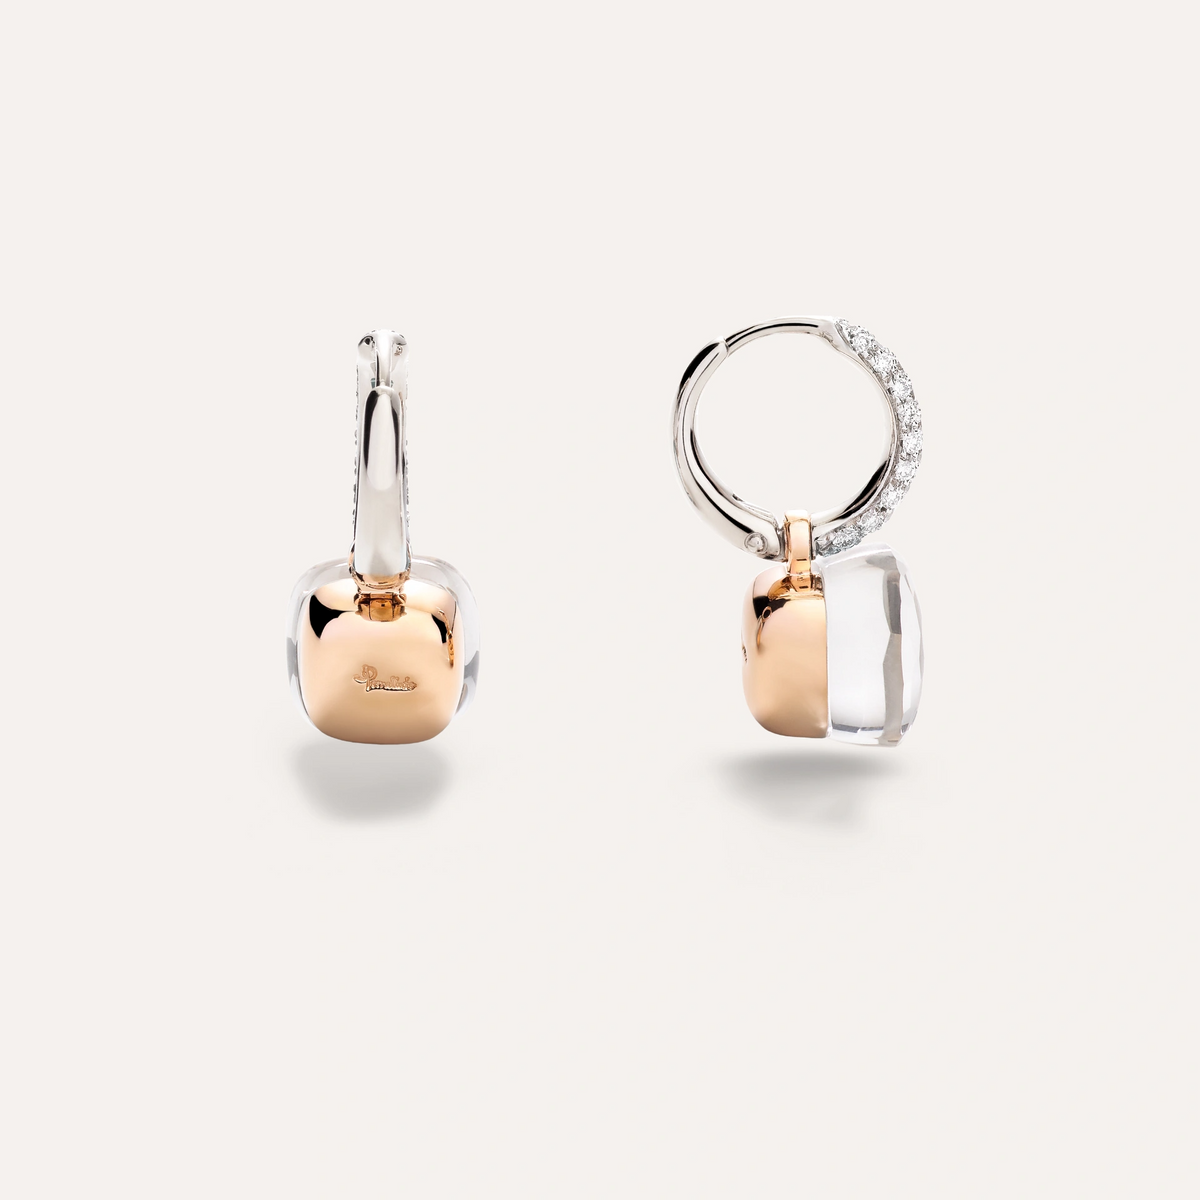 rose and white gold drop earrings from the pomellato  nudo collection featuring white topaz and diamond